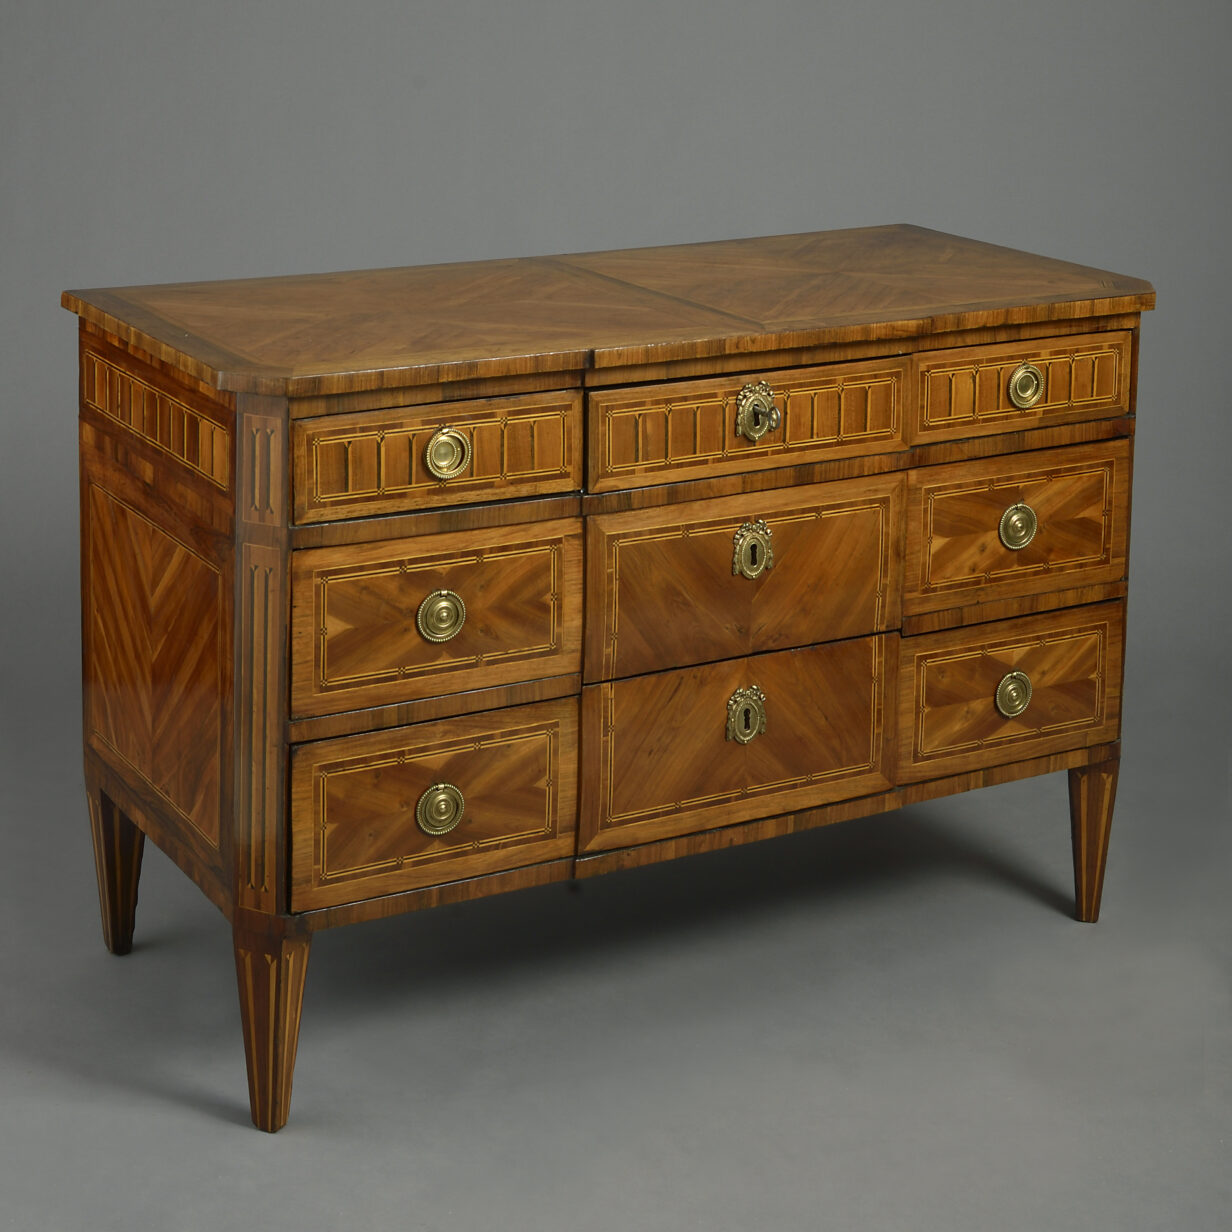 Late 18th century neo-classical parquetry commode